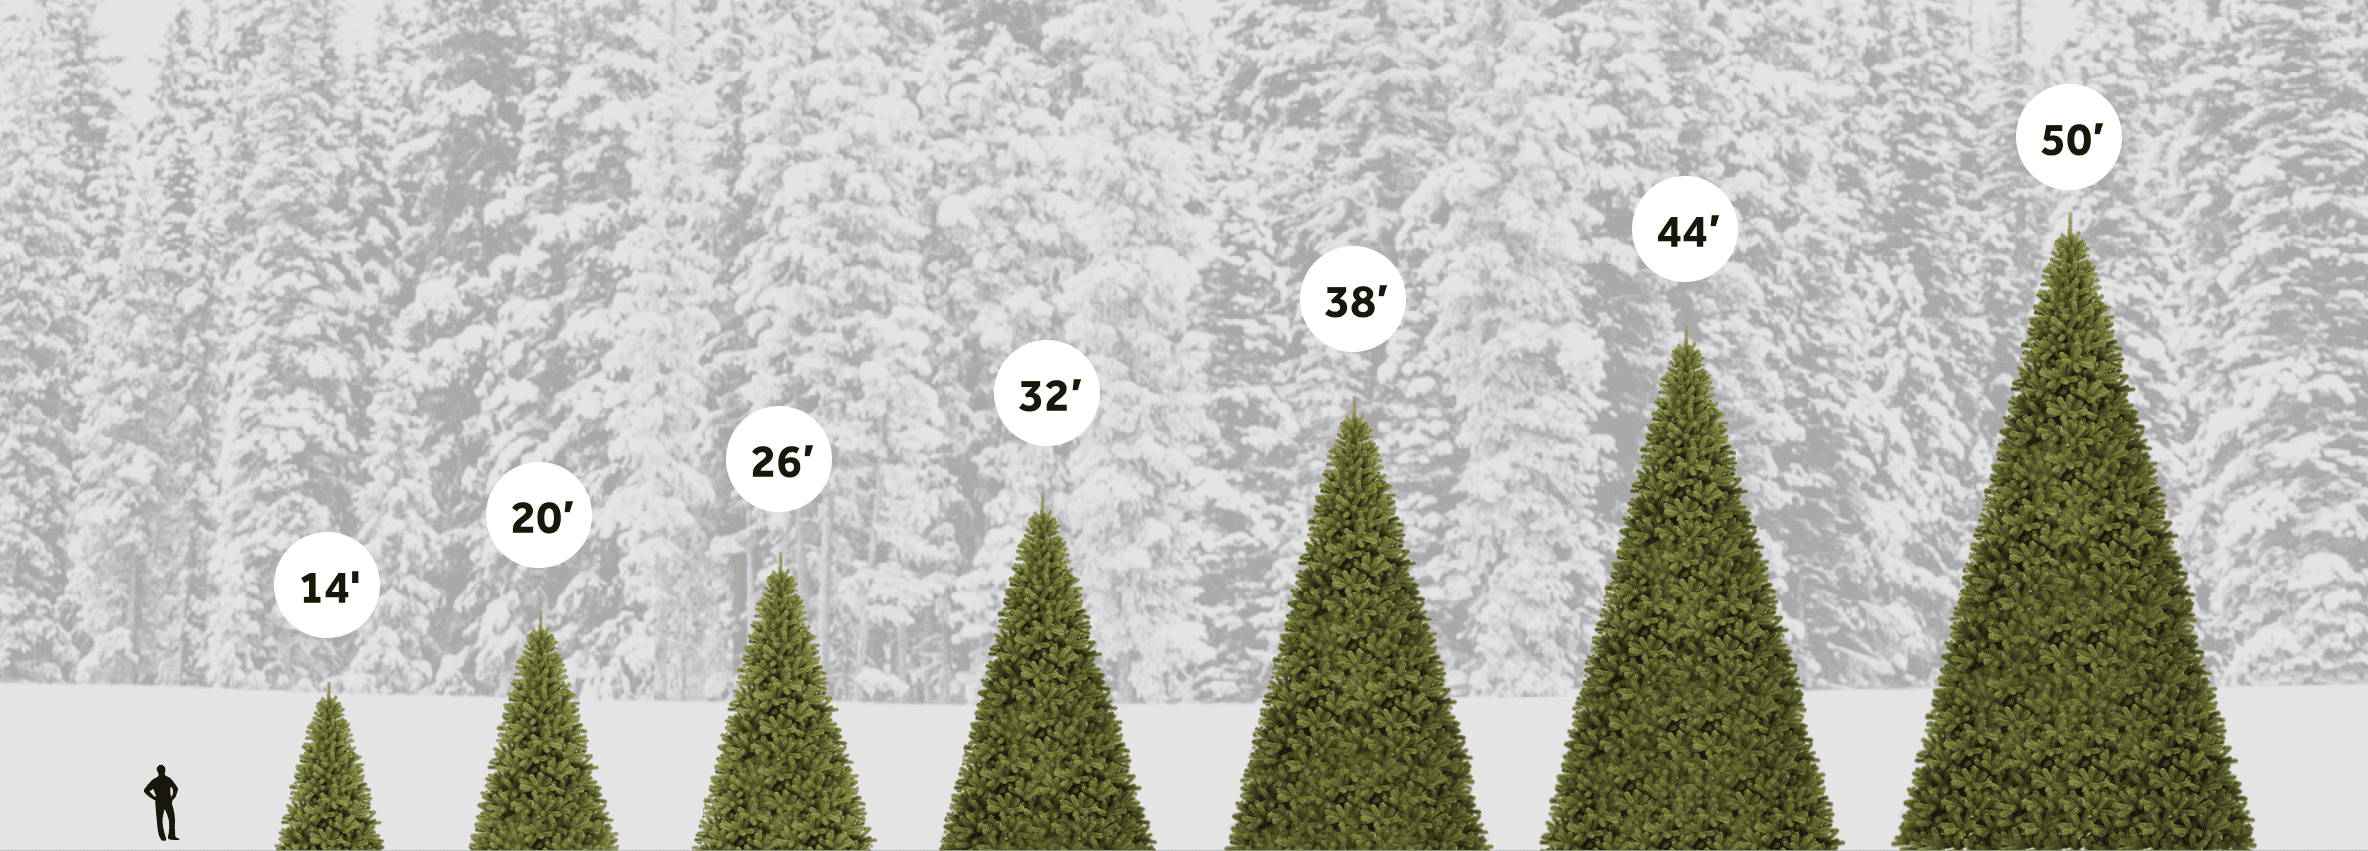 King of Christmas Commercial Trees Sizes